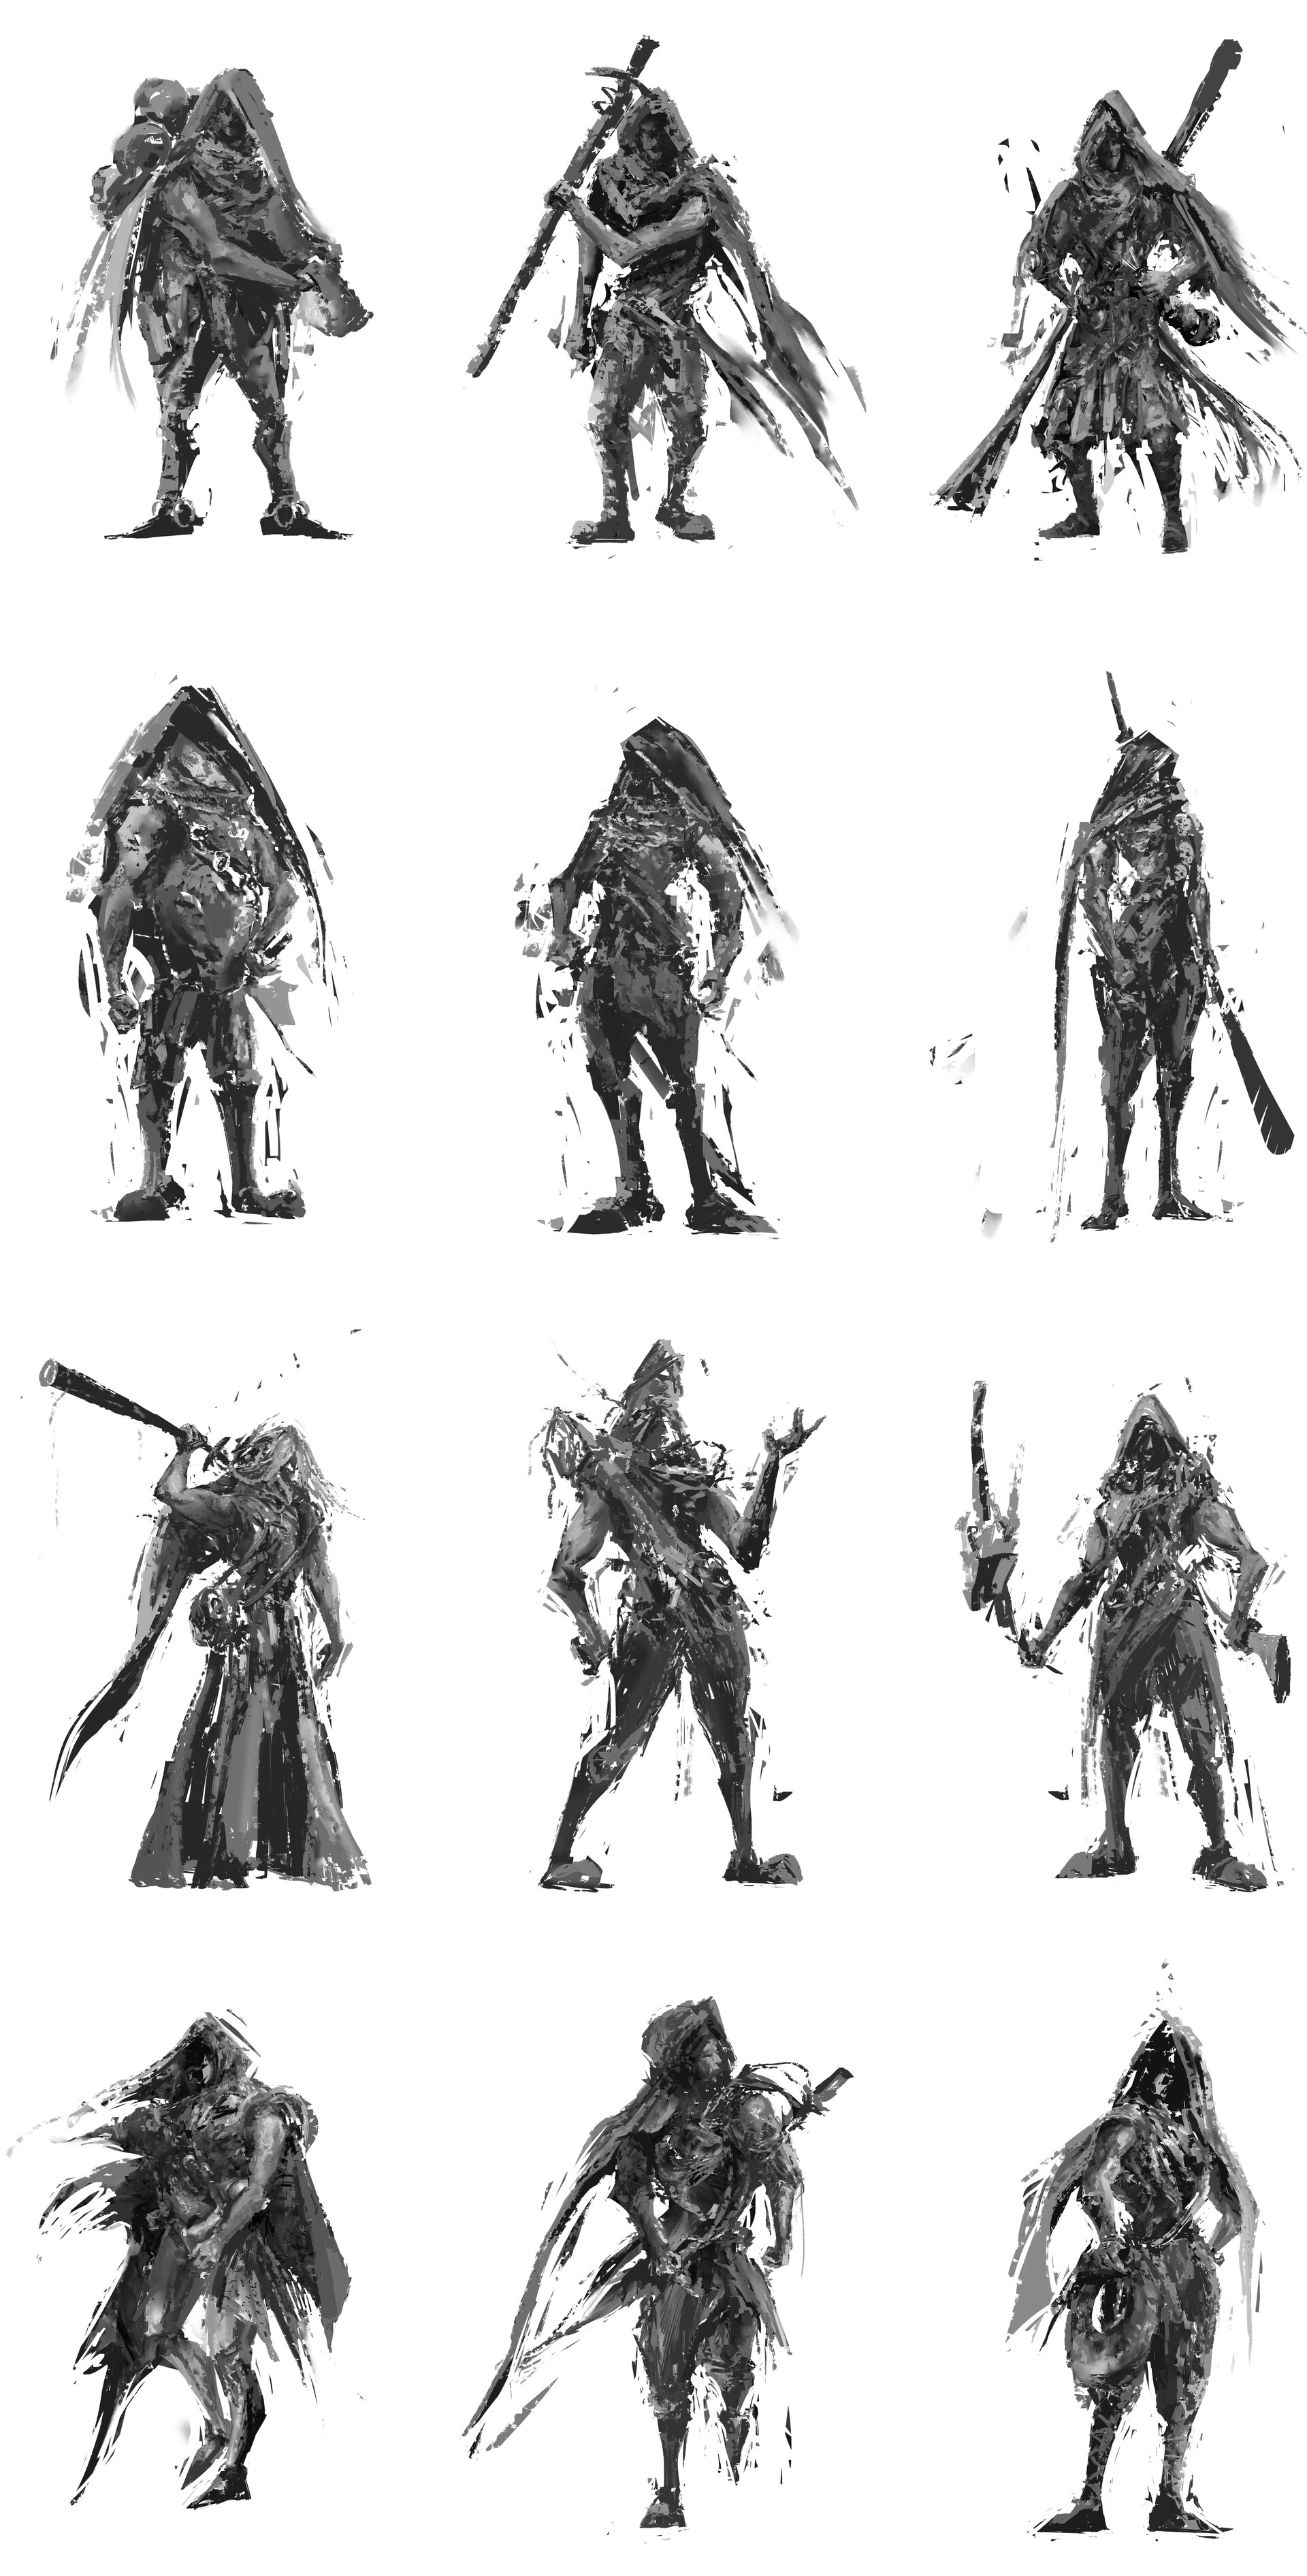 ArtStation - About some role concept exercises